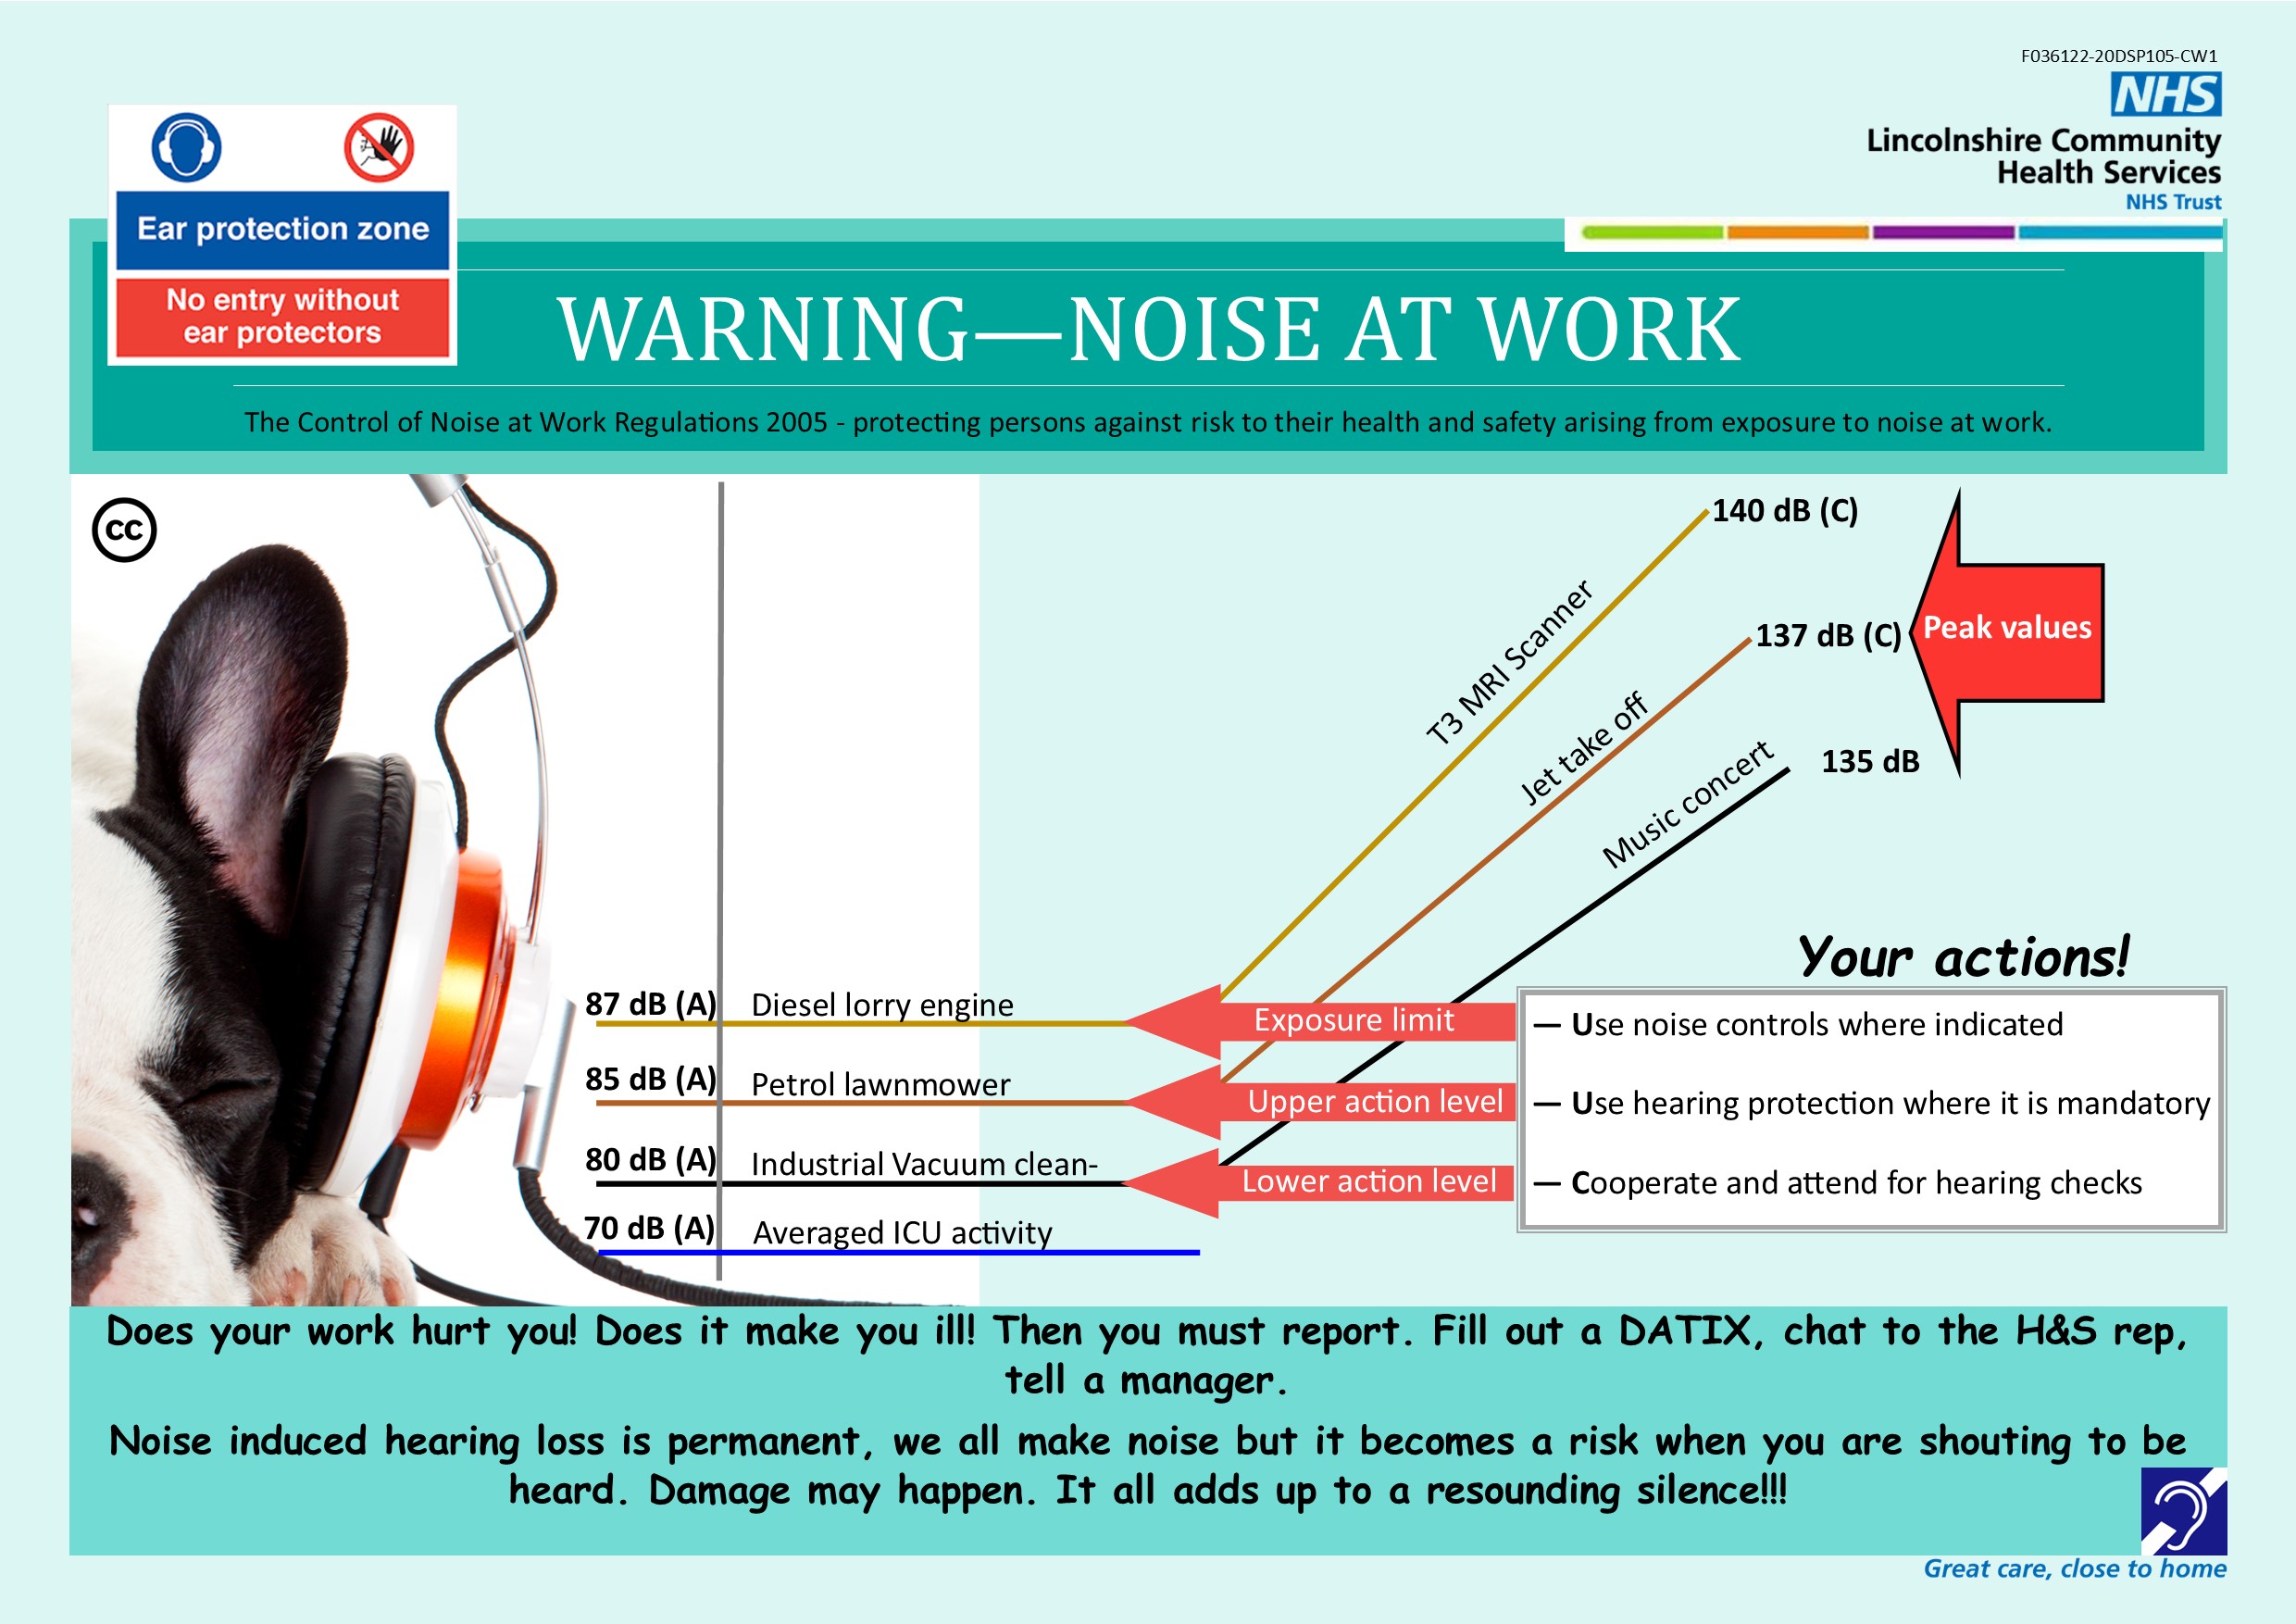 Poster advertising the dangers from noise at work